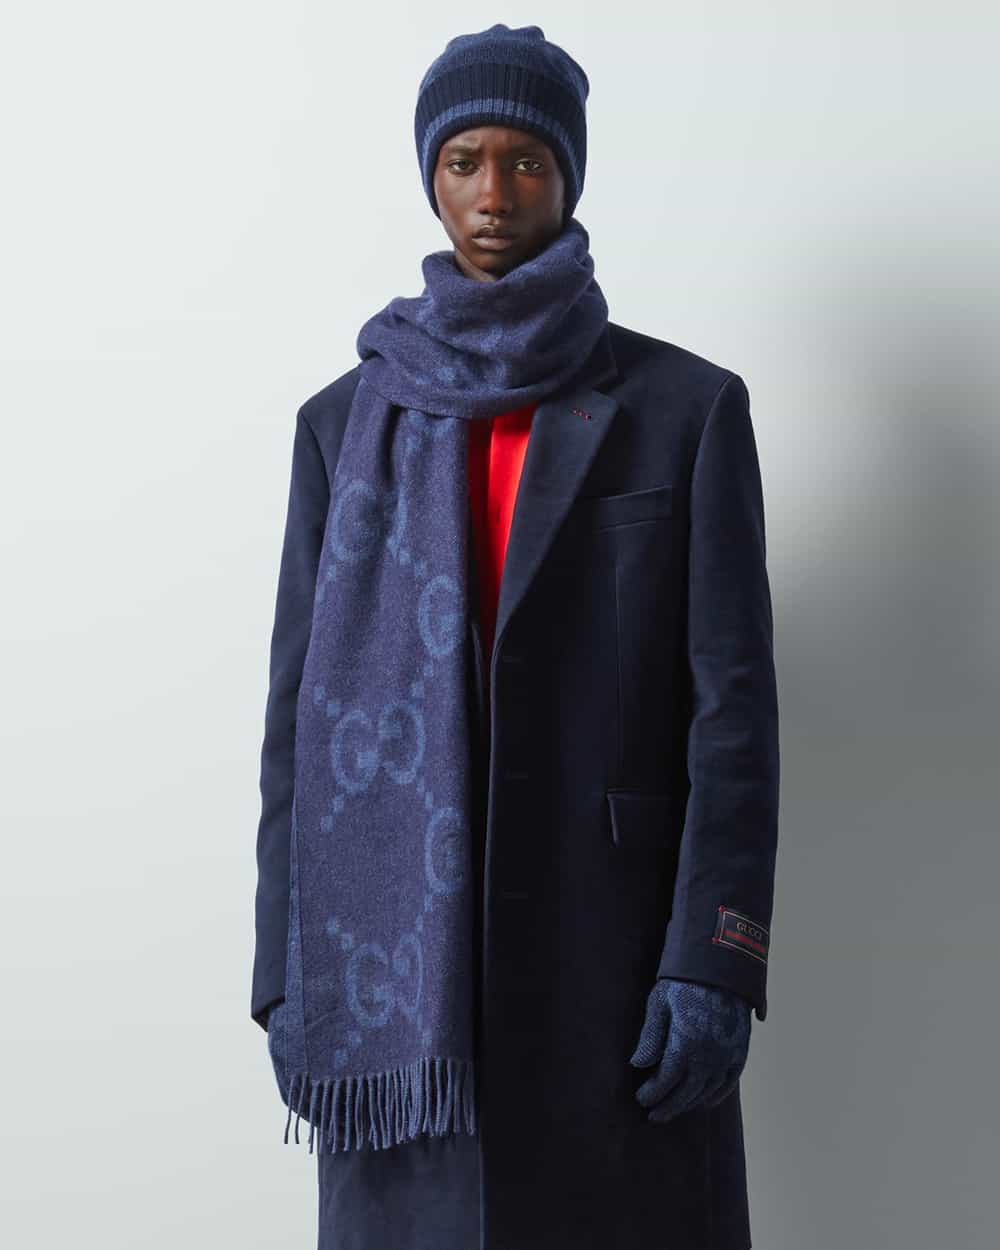 Man in bright red sweater and navy overcoat wearing a Gucci oversized logo scarf in navy